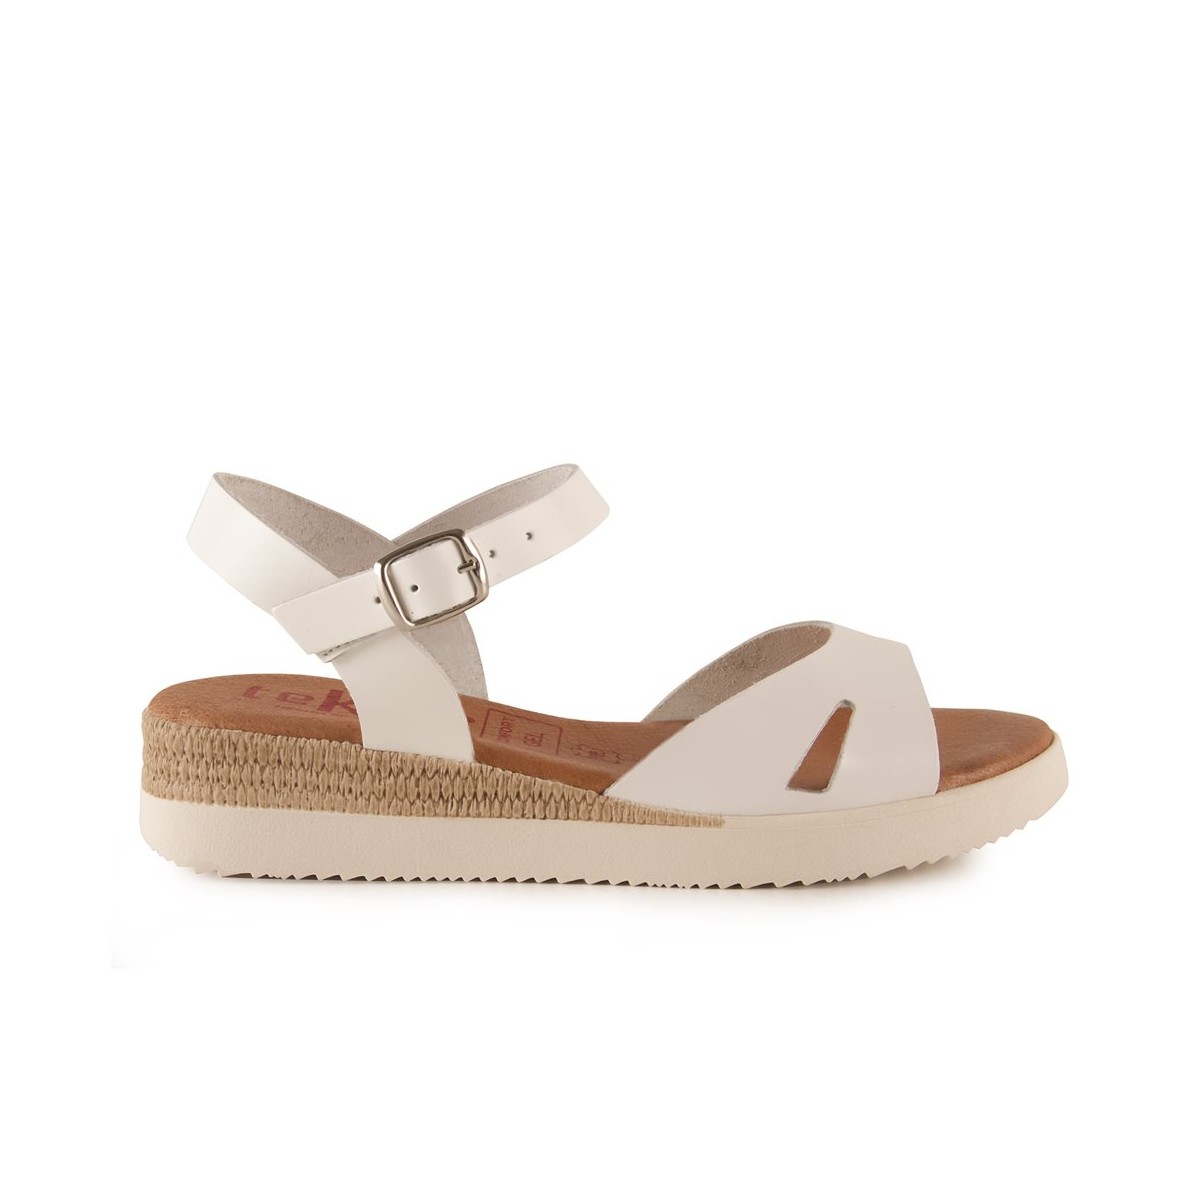 White leather sandals with low wedge by Tekila